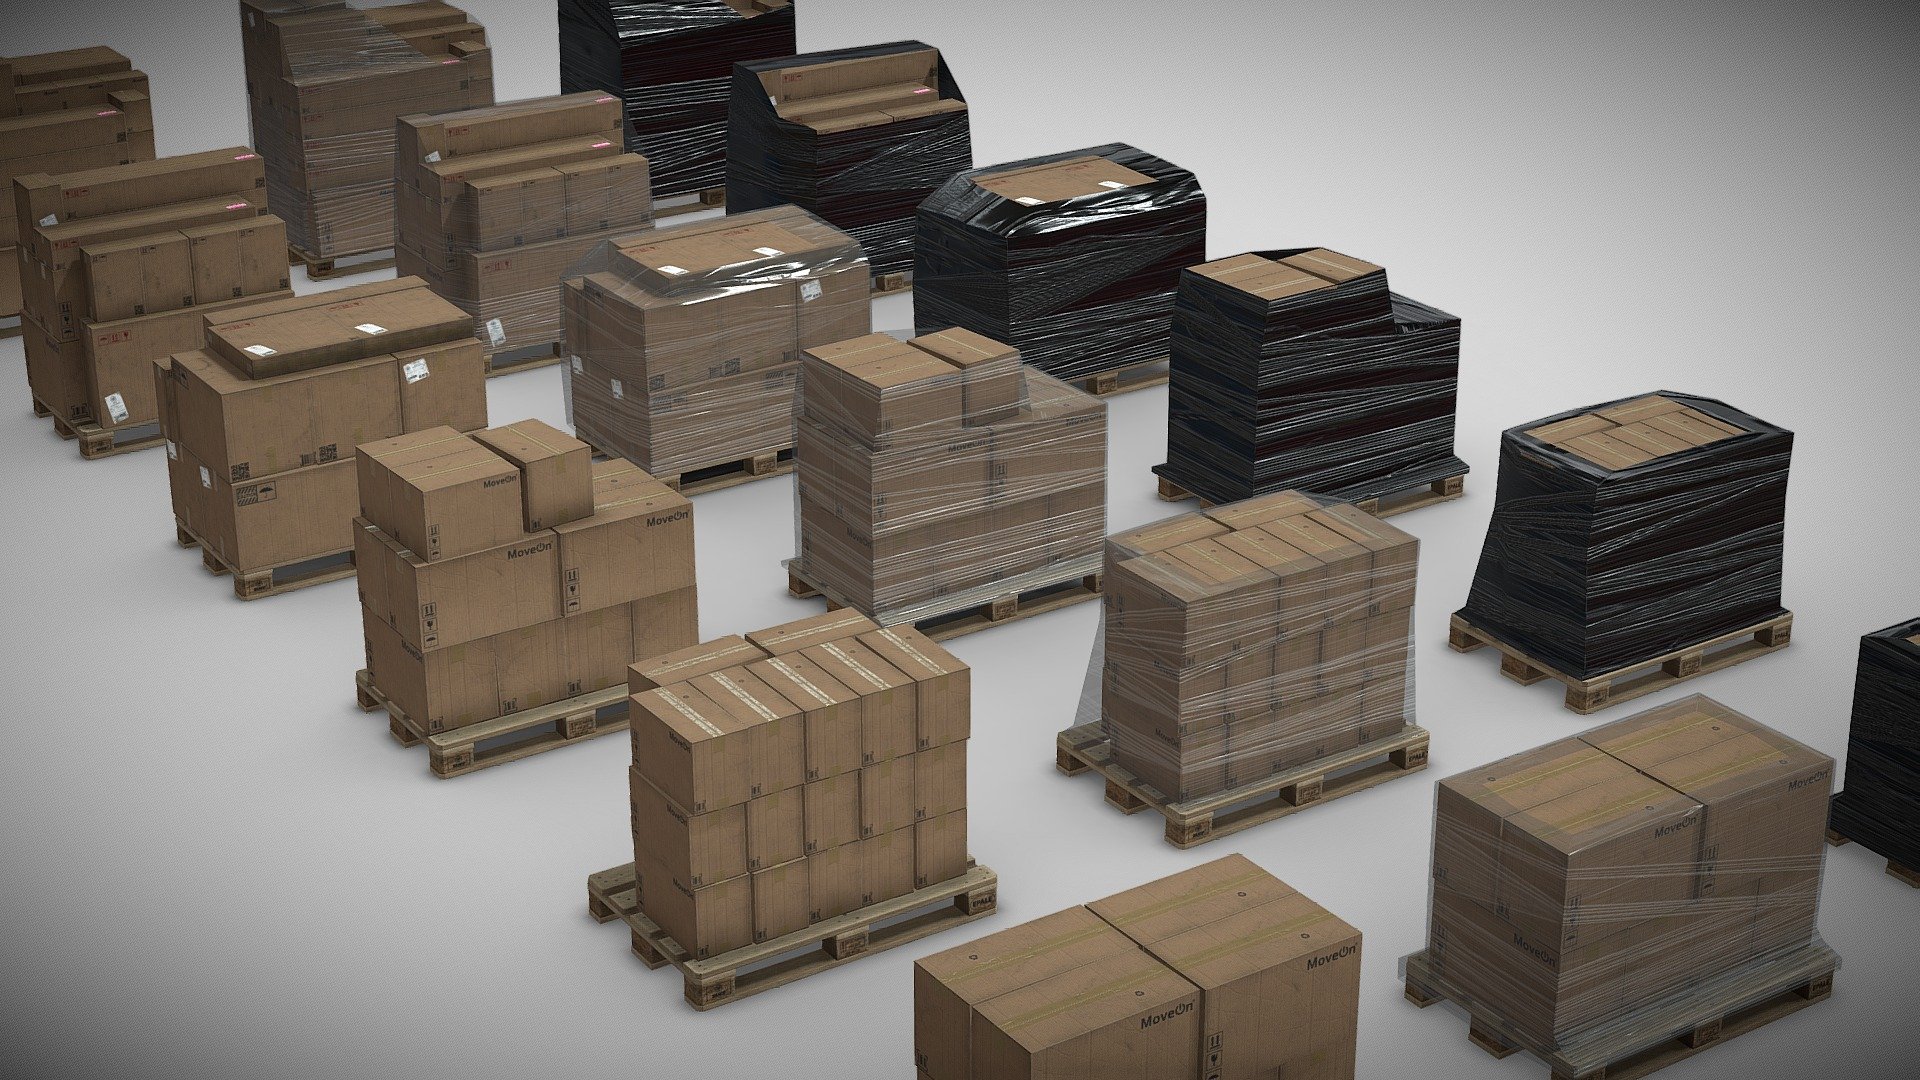 Realistic and detailed low-poly set of wood pallets with goods suitable for VR, industrial visualization, simulators, and games.

Technical Features:




PBR Textures: base color (RGB+A), roughness, metallic, normal map, height map, and opacity.

Polys:  35 - 174 (66 - 348 tris).

Number of unique meshes: 13

Real-world scale based on references.

Semi-modular (assets need to be assembled manually without snapping grid).

All branding and labels are custom made.

Formats included: .blend / .fbx

Textures:




Wrapping film: 2 sets, transparent and black.

Boxes Set 02: 3 sets, new, dirty, and old.

Pallet: 1 set, brand new




Number of textures: 60

Texture format: PNG

Texture size: 4096 x 4096 (4K)

The model can be used in any game, personal project, ArchViz, etc. It may not be reselled or redistributed.

Click here for more warehouse related models and more! - Wood Pallets with Goods - Buy Royalty Free 3D model by NotAnotherApocalypticCo. (@notanotherapocalypticco) 3d model